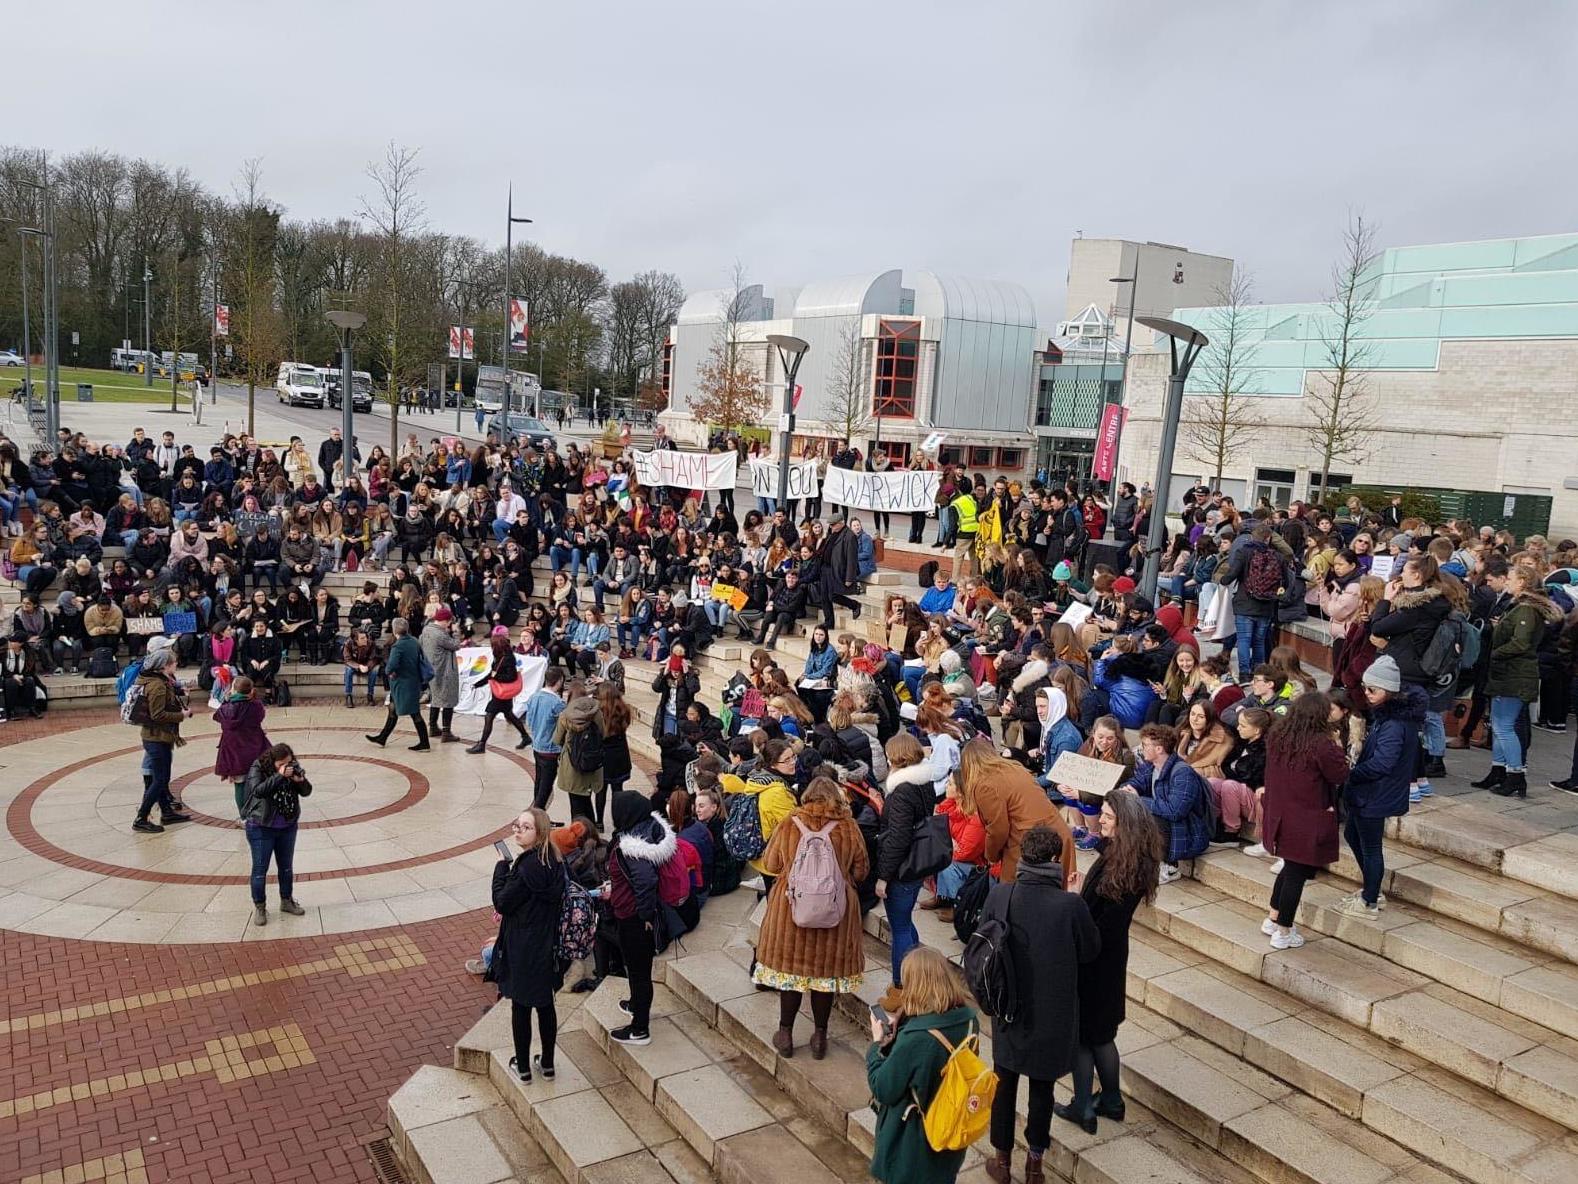 Hundreds of students march on campus, protesting Warwick University’s response to the rape threats